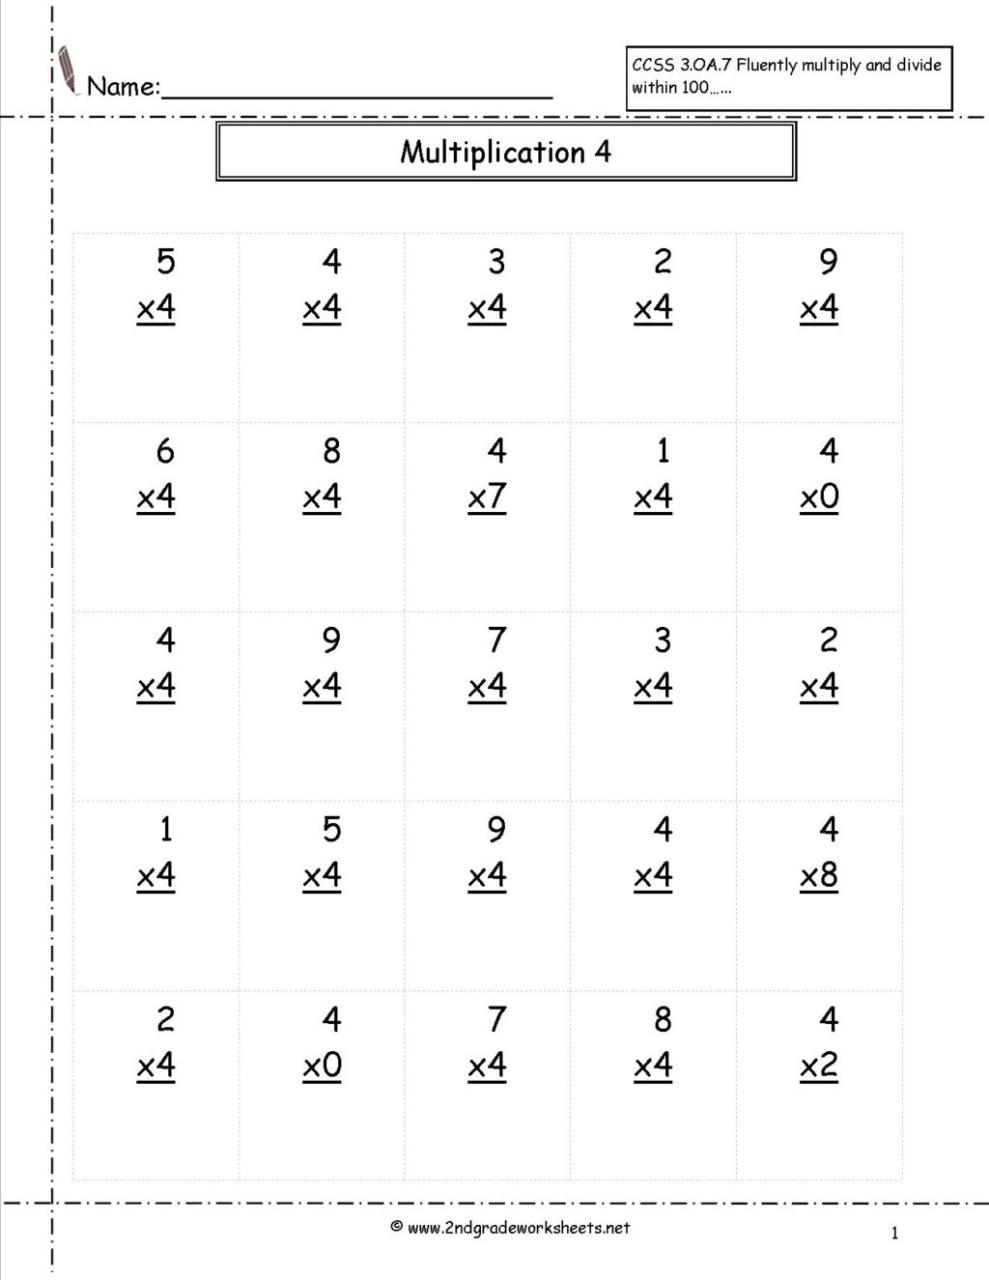 Multiplication By 6 Worksheets – Free